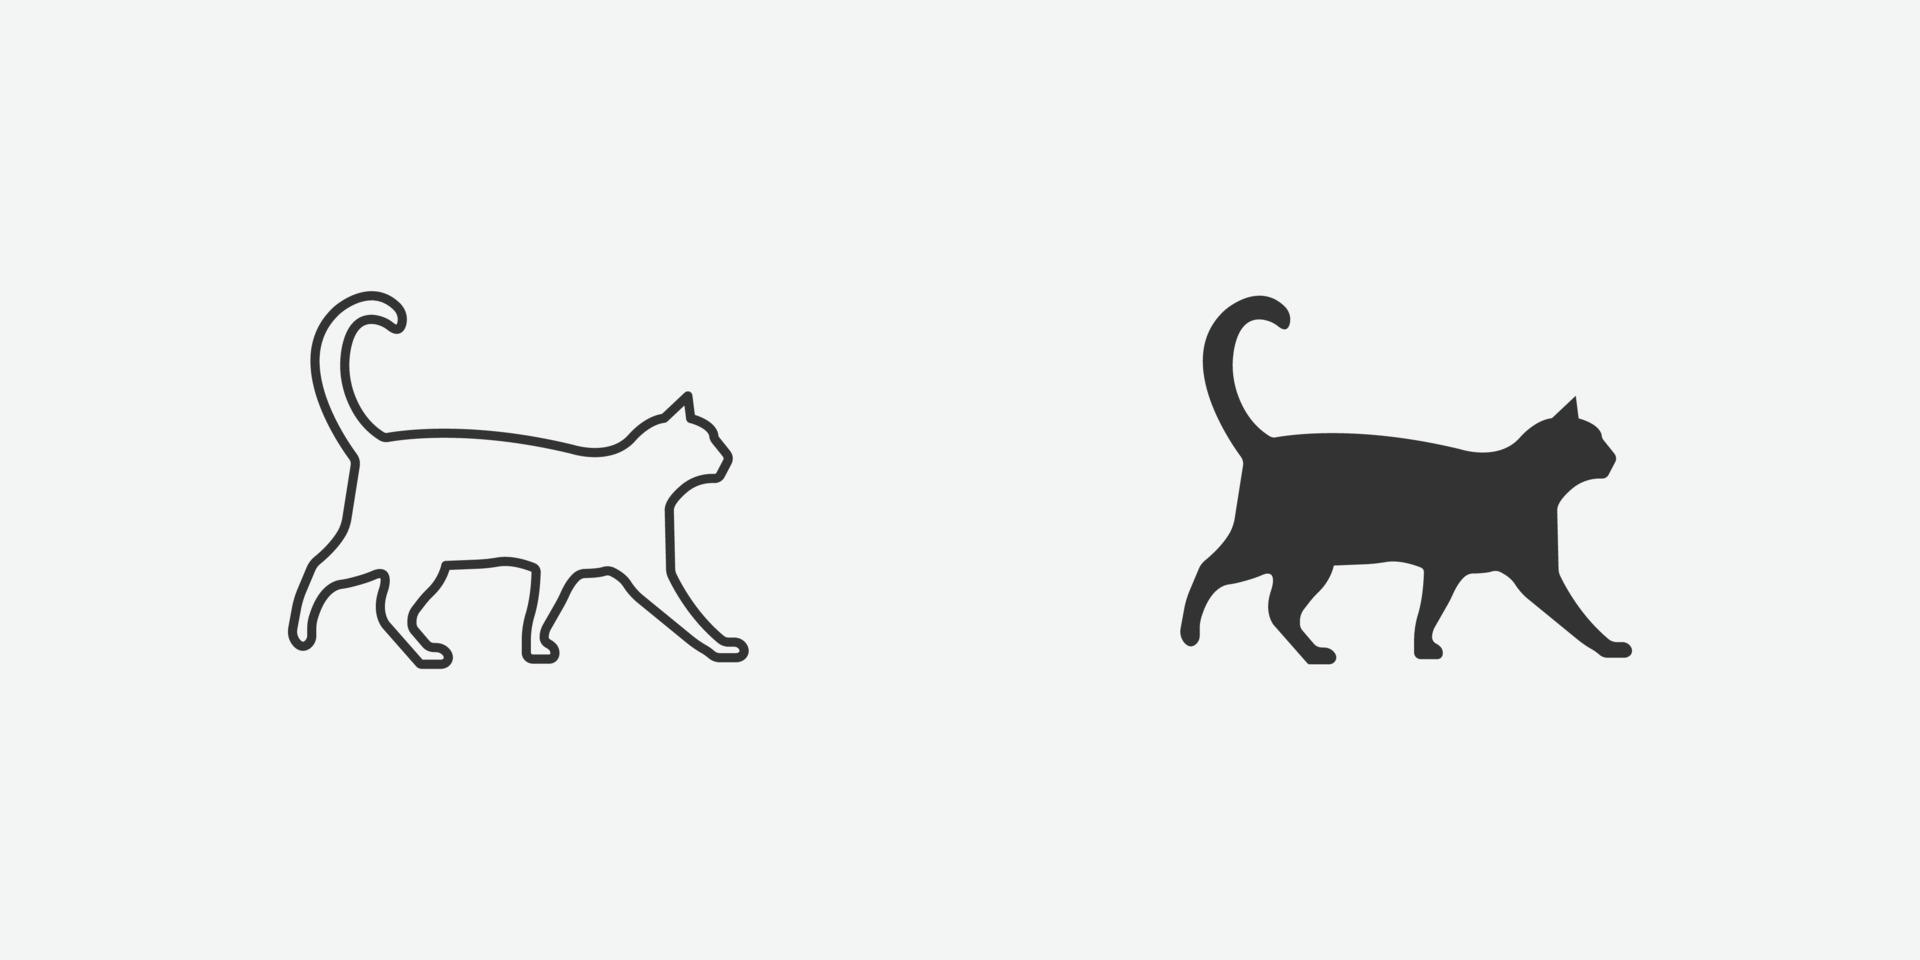 cat vector icon and pet symbol